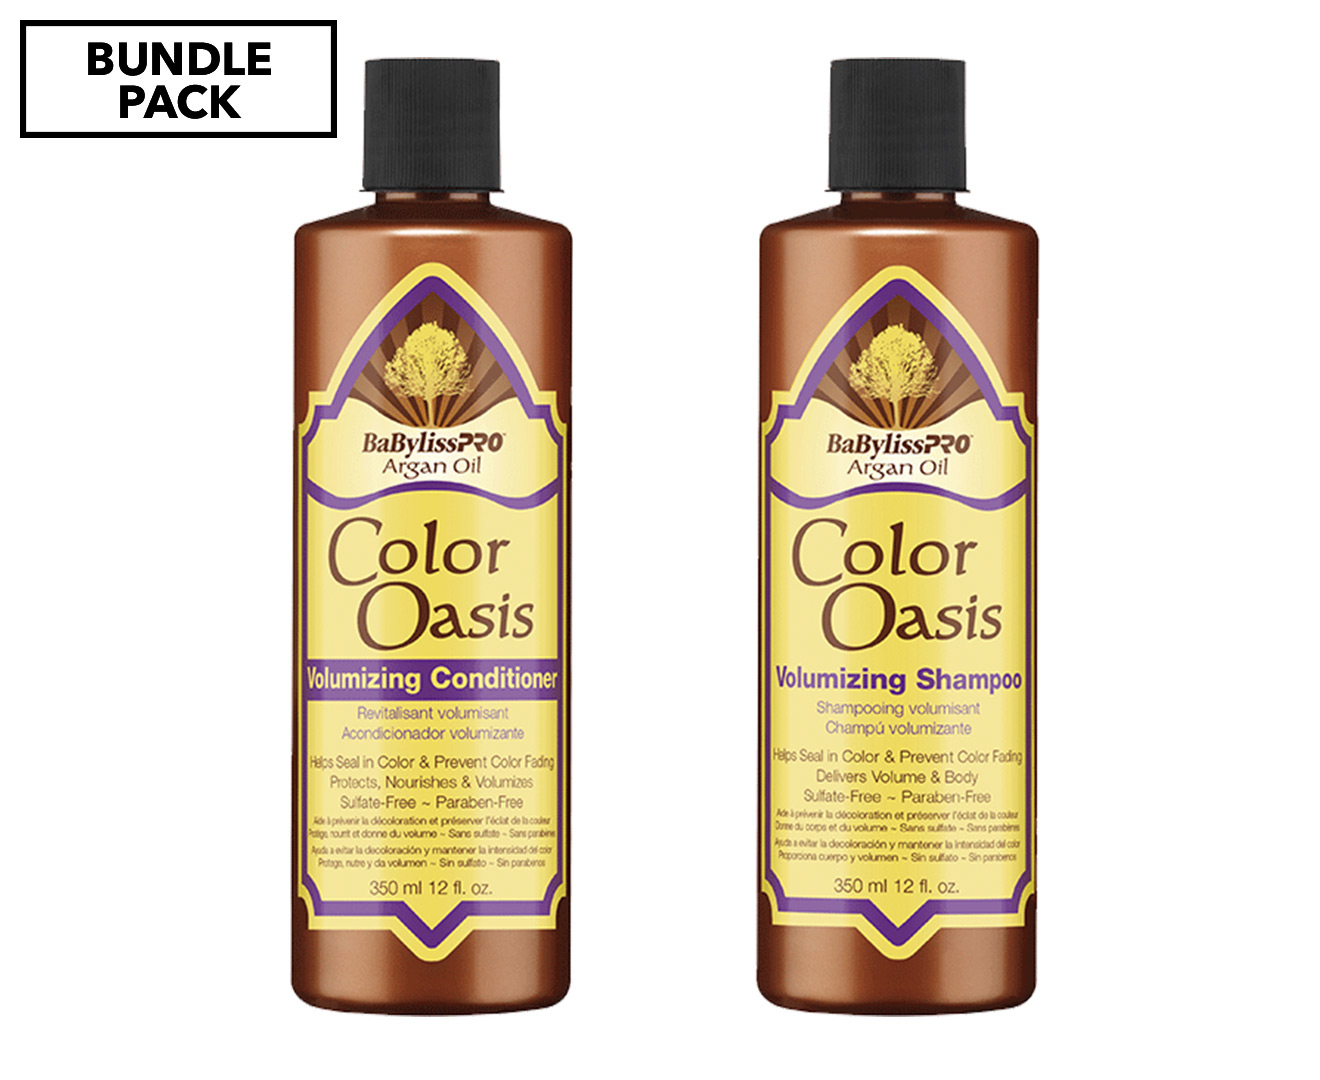 8. "One 'n Only Argan Oil Color Oasis Blue Shampoo" at Sally Beauty - wide 3